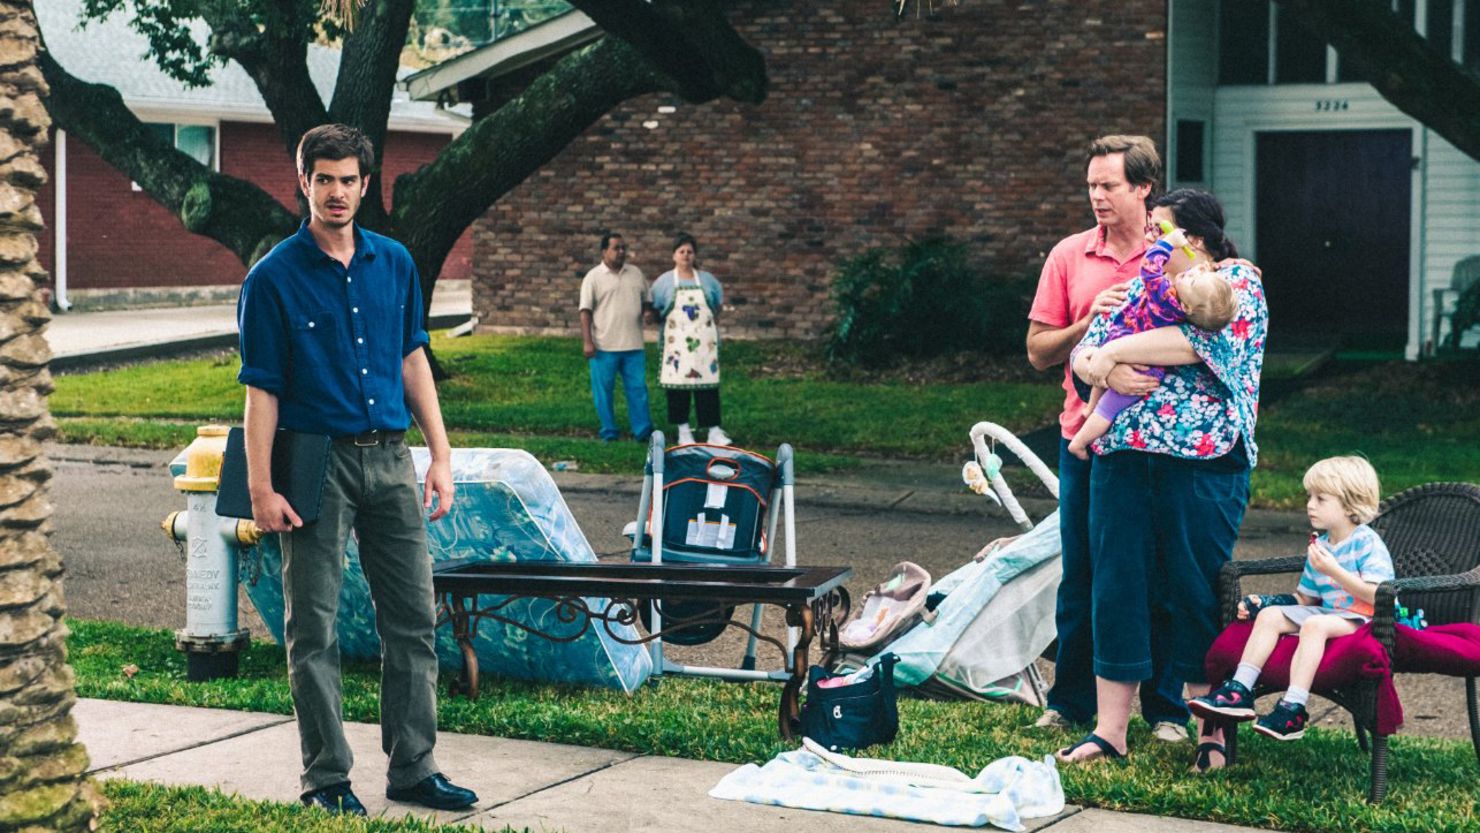 In the new film, "99 Homes", a family unable to make the mortgage is put out on the street.